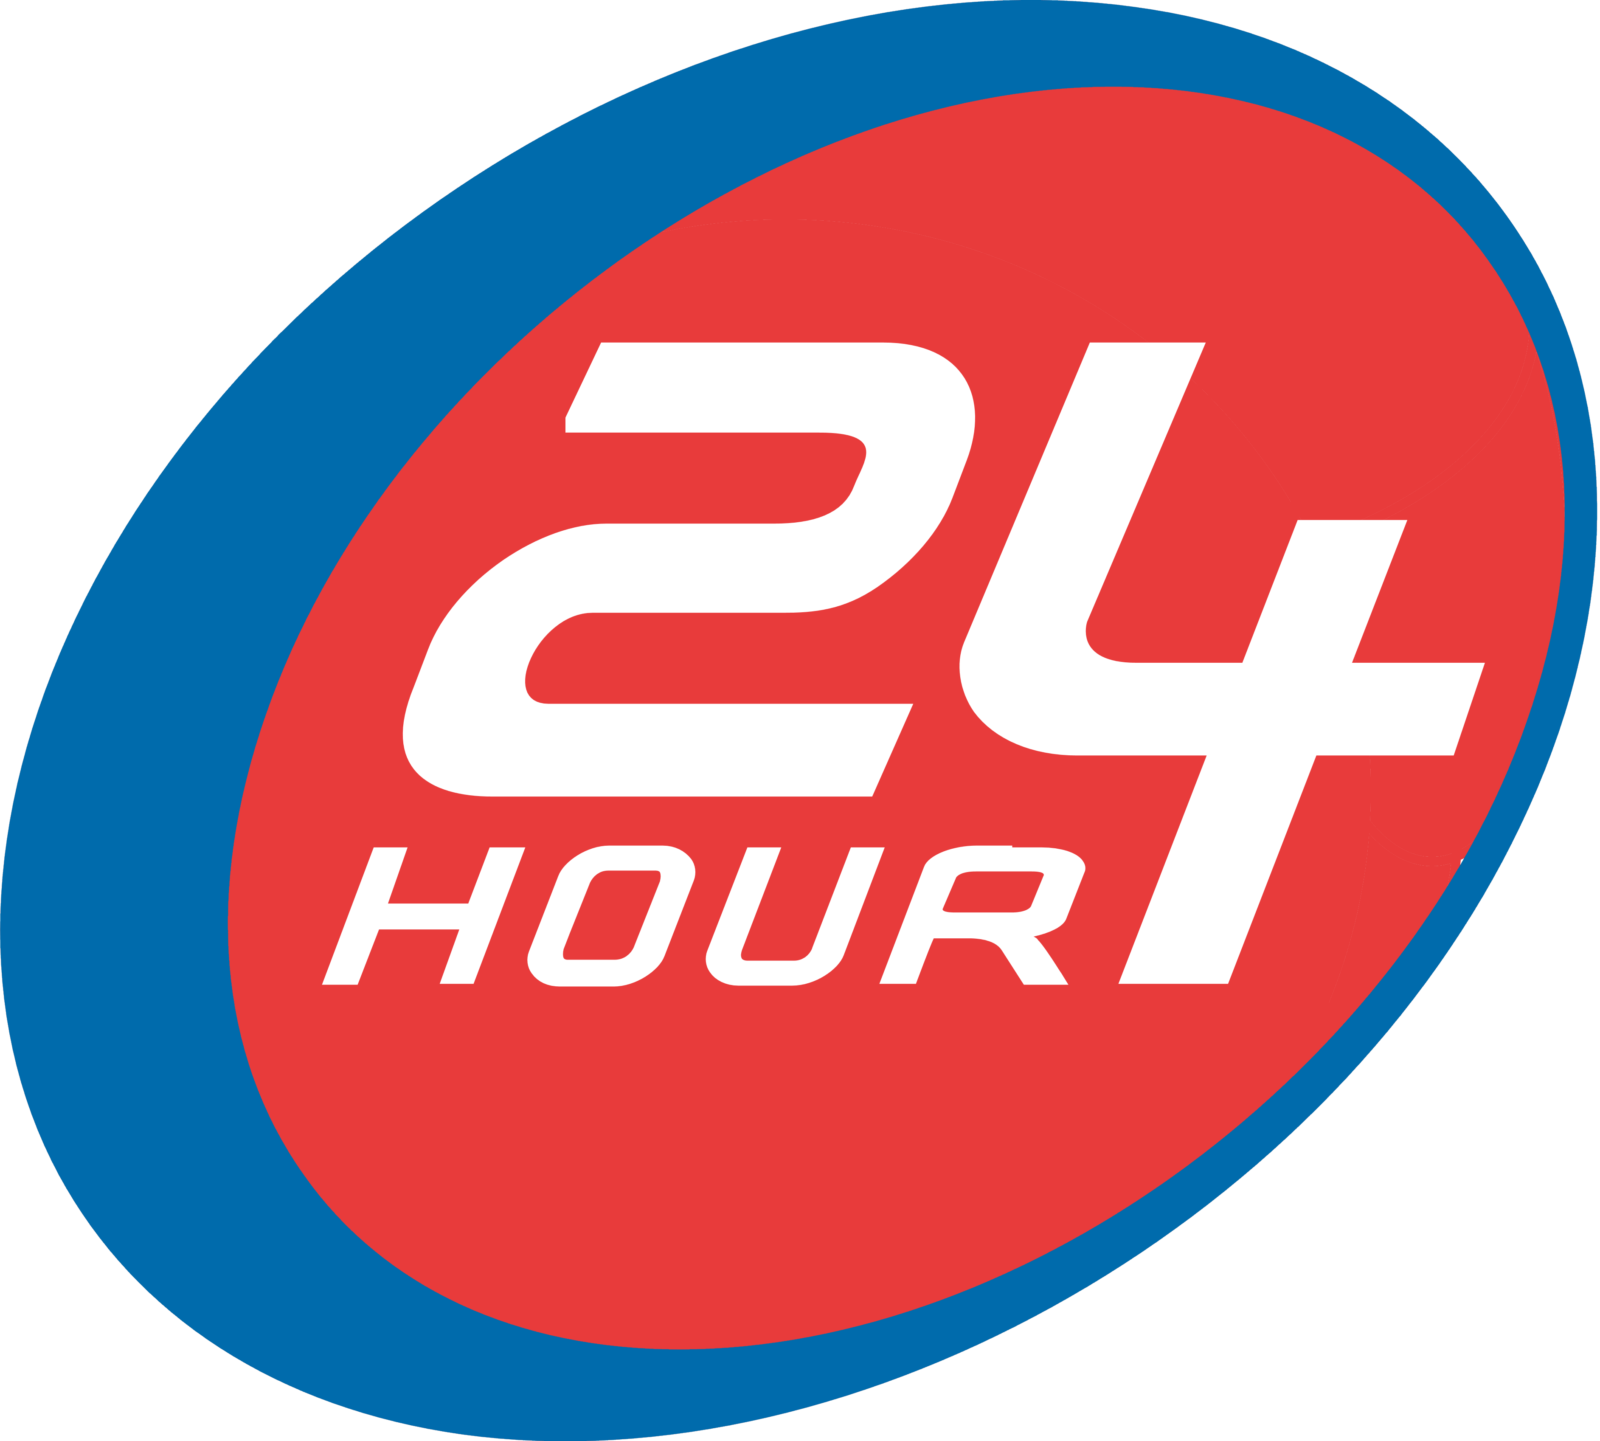 Inspiration 24 Hour Fitness Logo Facts, Meaning, History & PNG